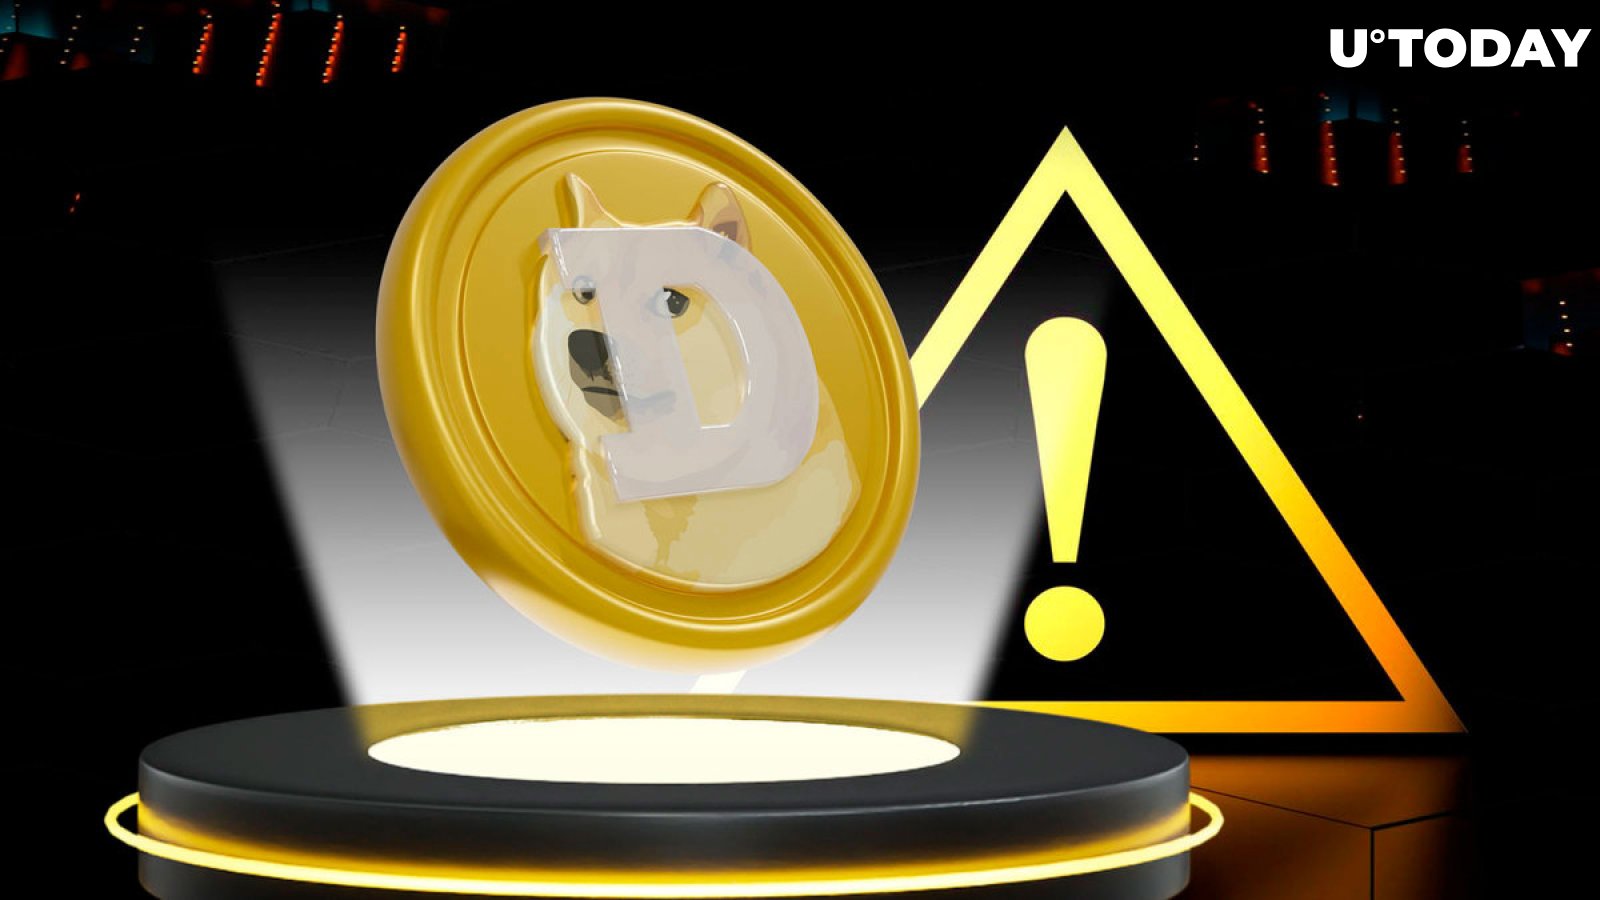 Top Dogecoin (DOGE) Wallet Issues Warning After Exploit Attempt: Details